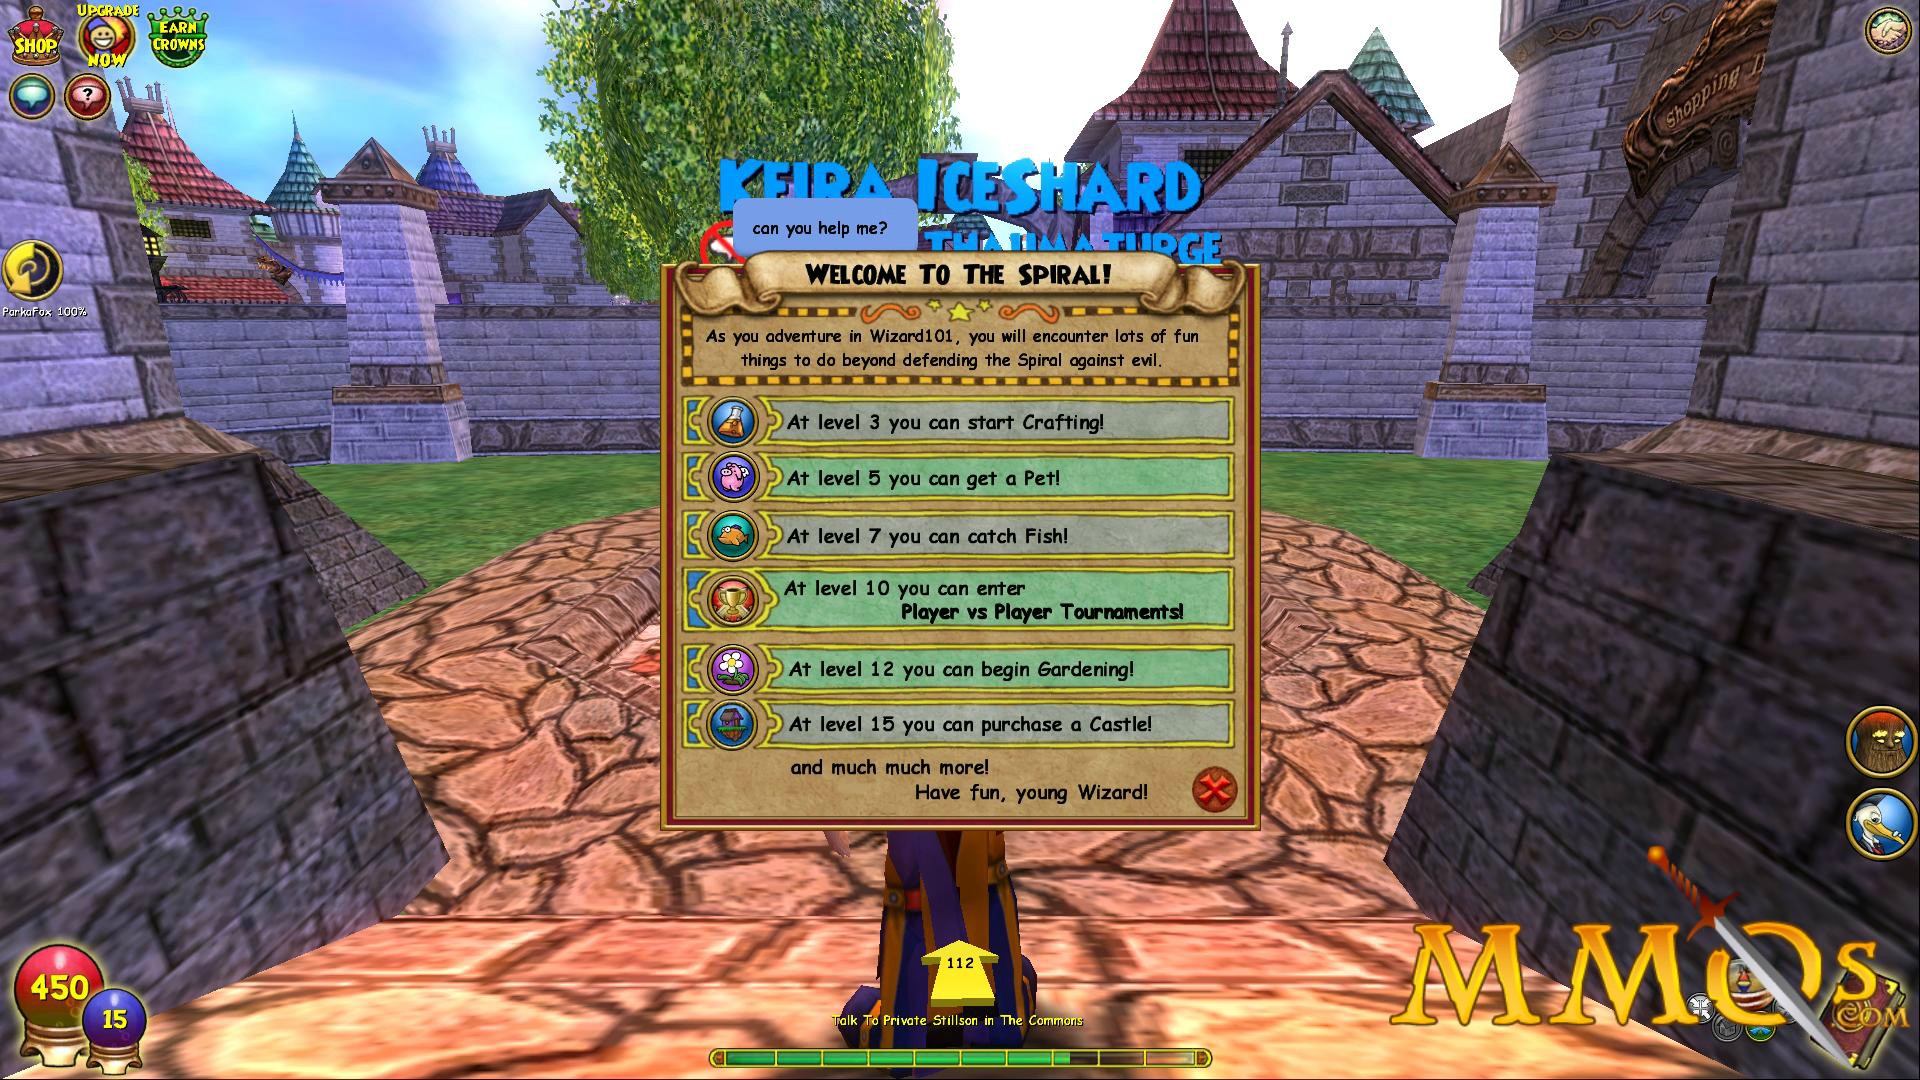 Wizard101: Is It Really Over? - Adventures of the Spiral